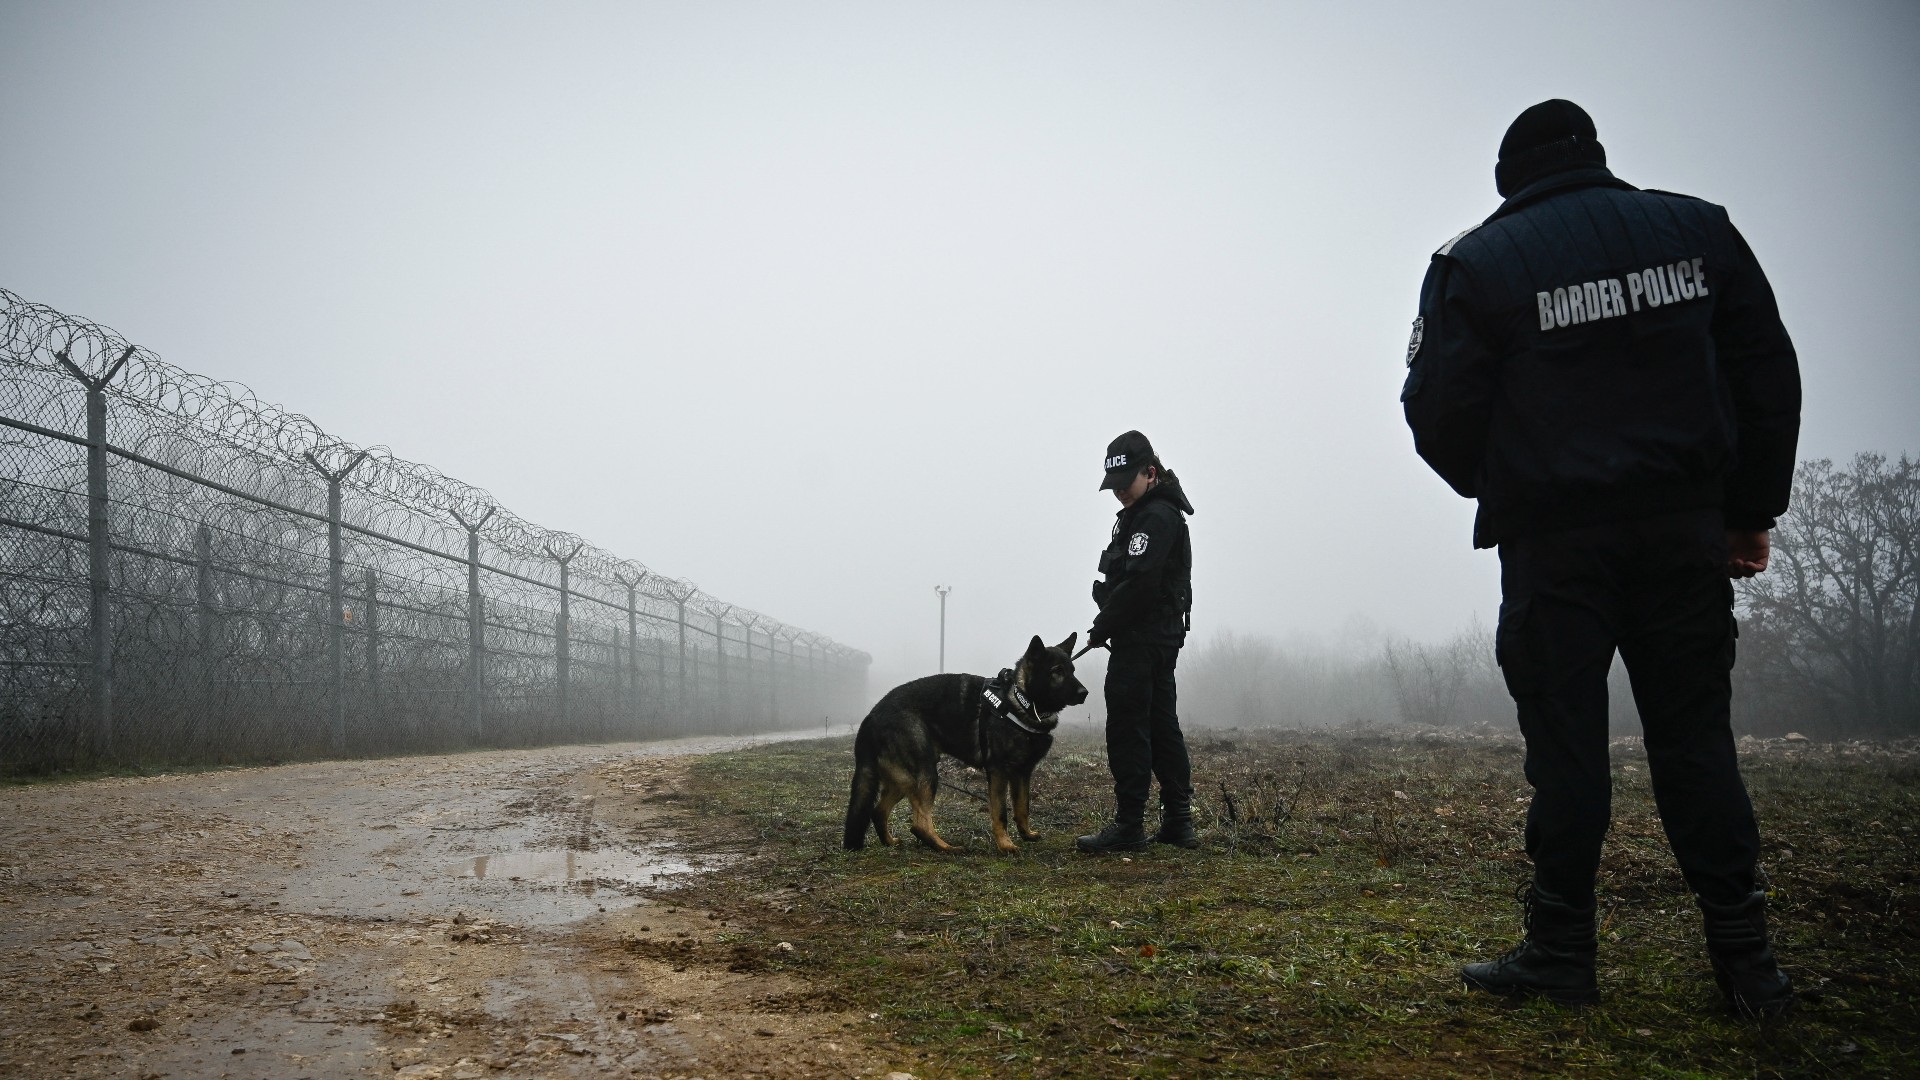 Bulgarian border police officers patrol with a dog in front of the border fence on the Bulgaria-Turkey border near the village of Lesovo on January 13, 2023